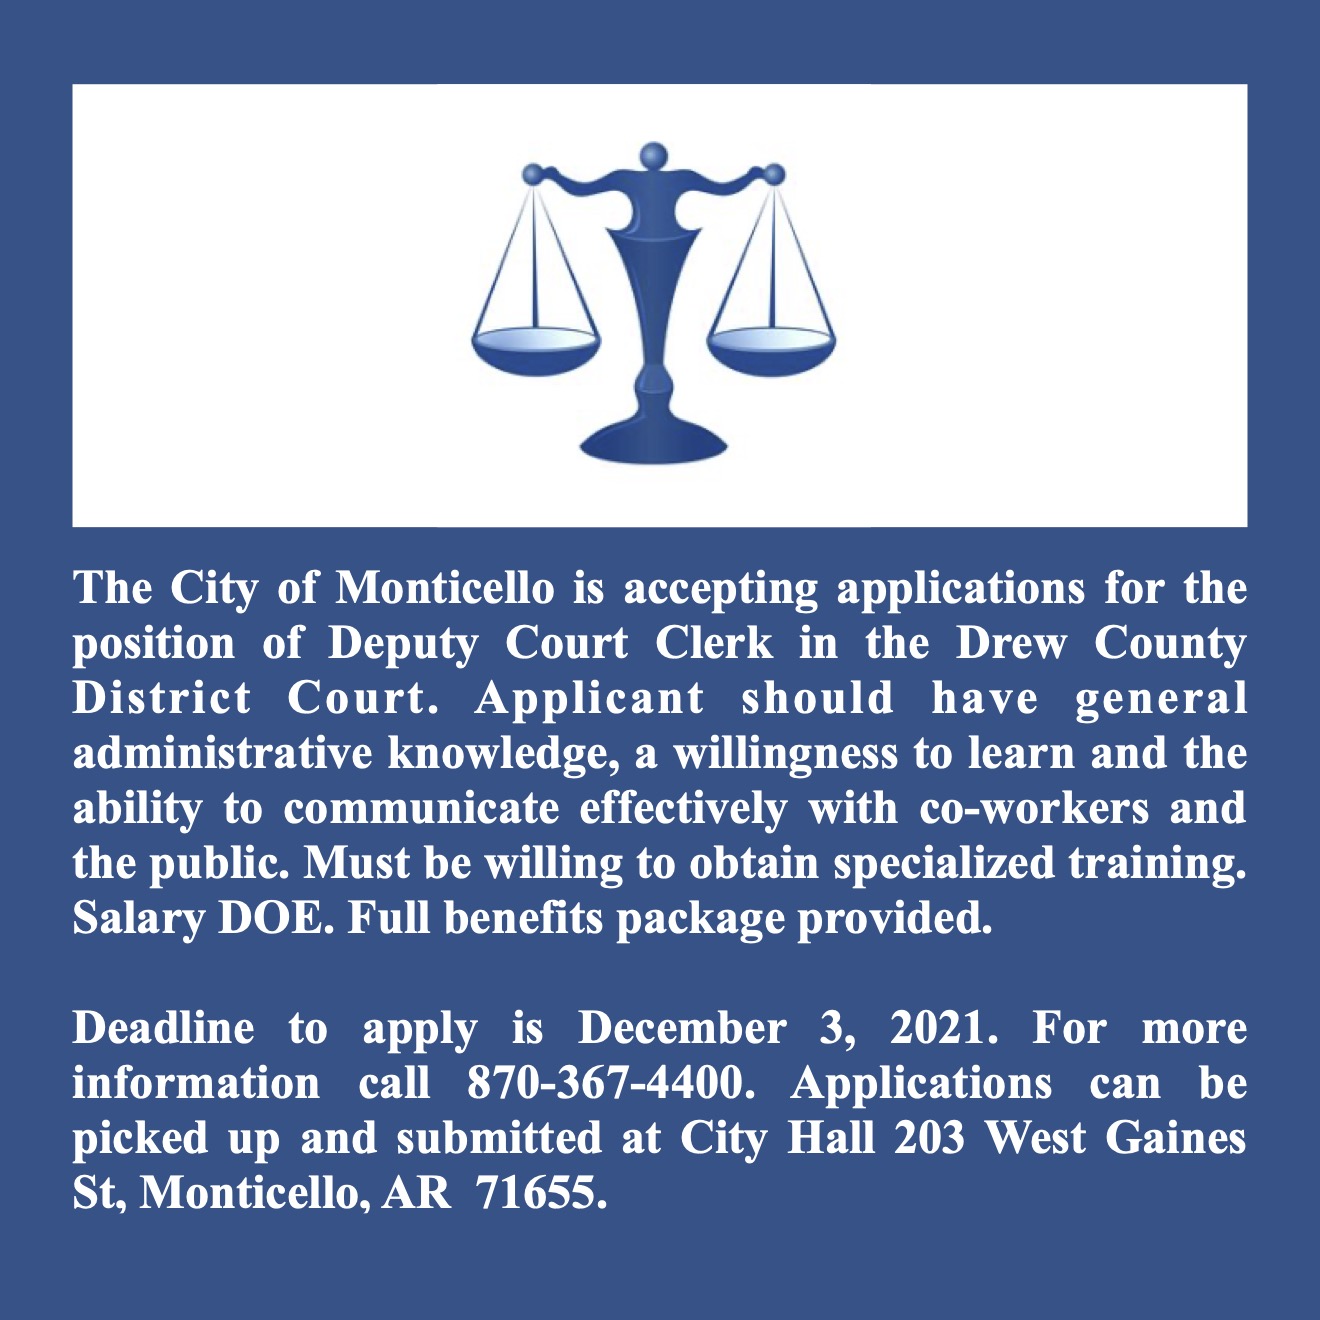 City of Monticello accepting applications for Deputy Court Clerk